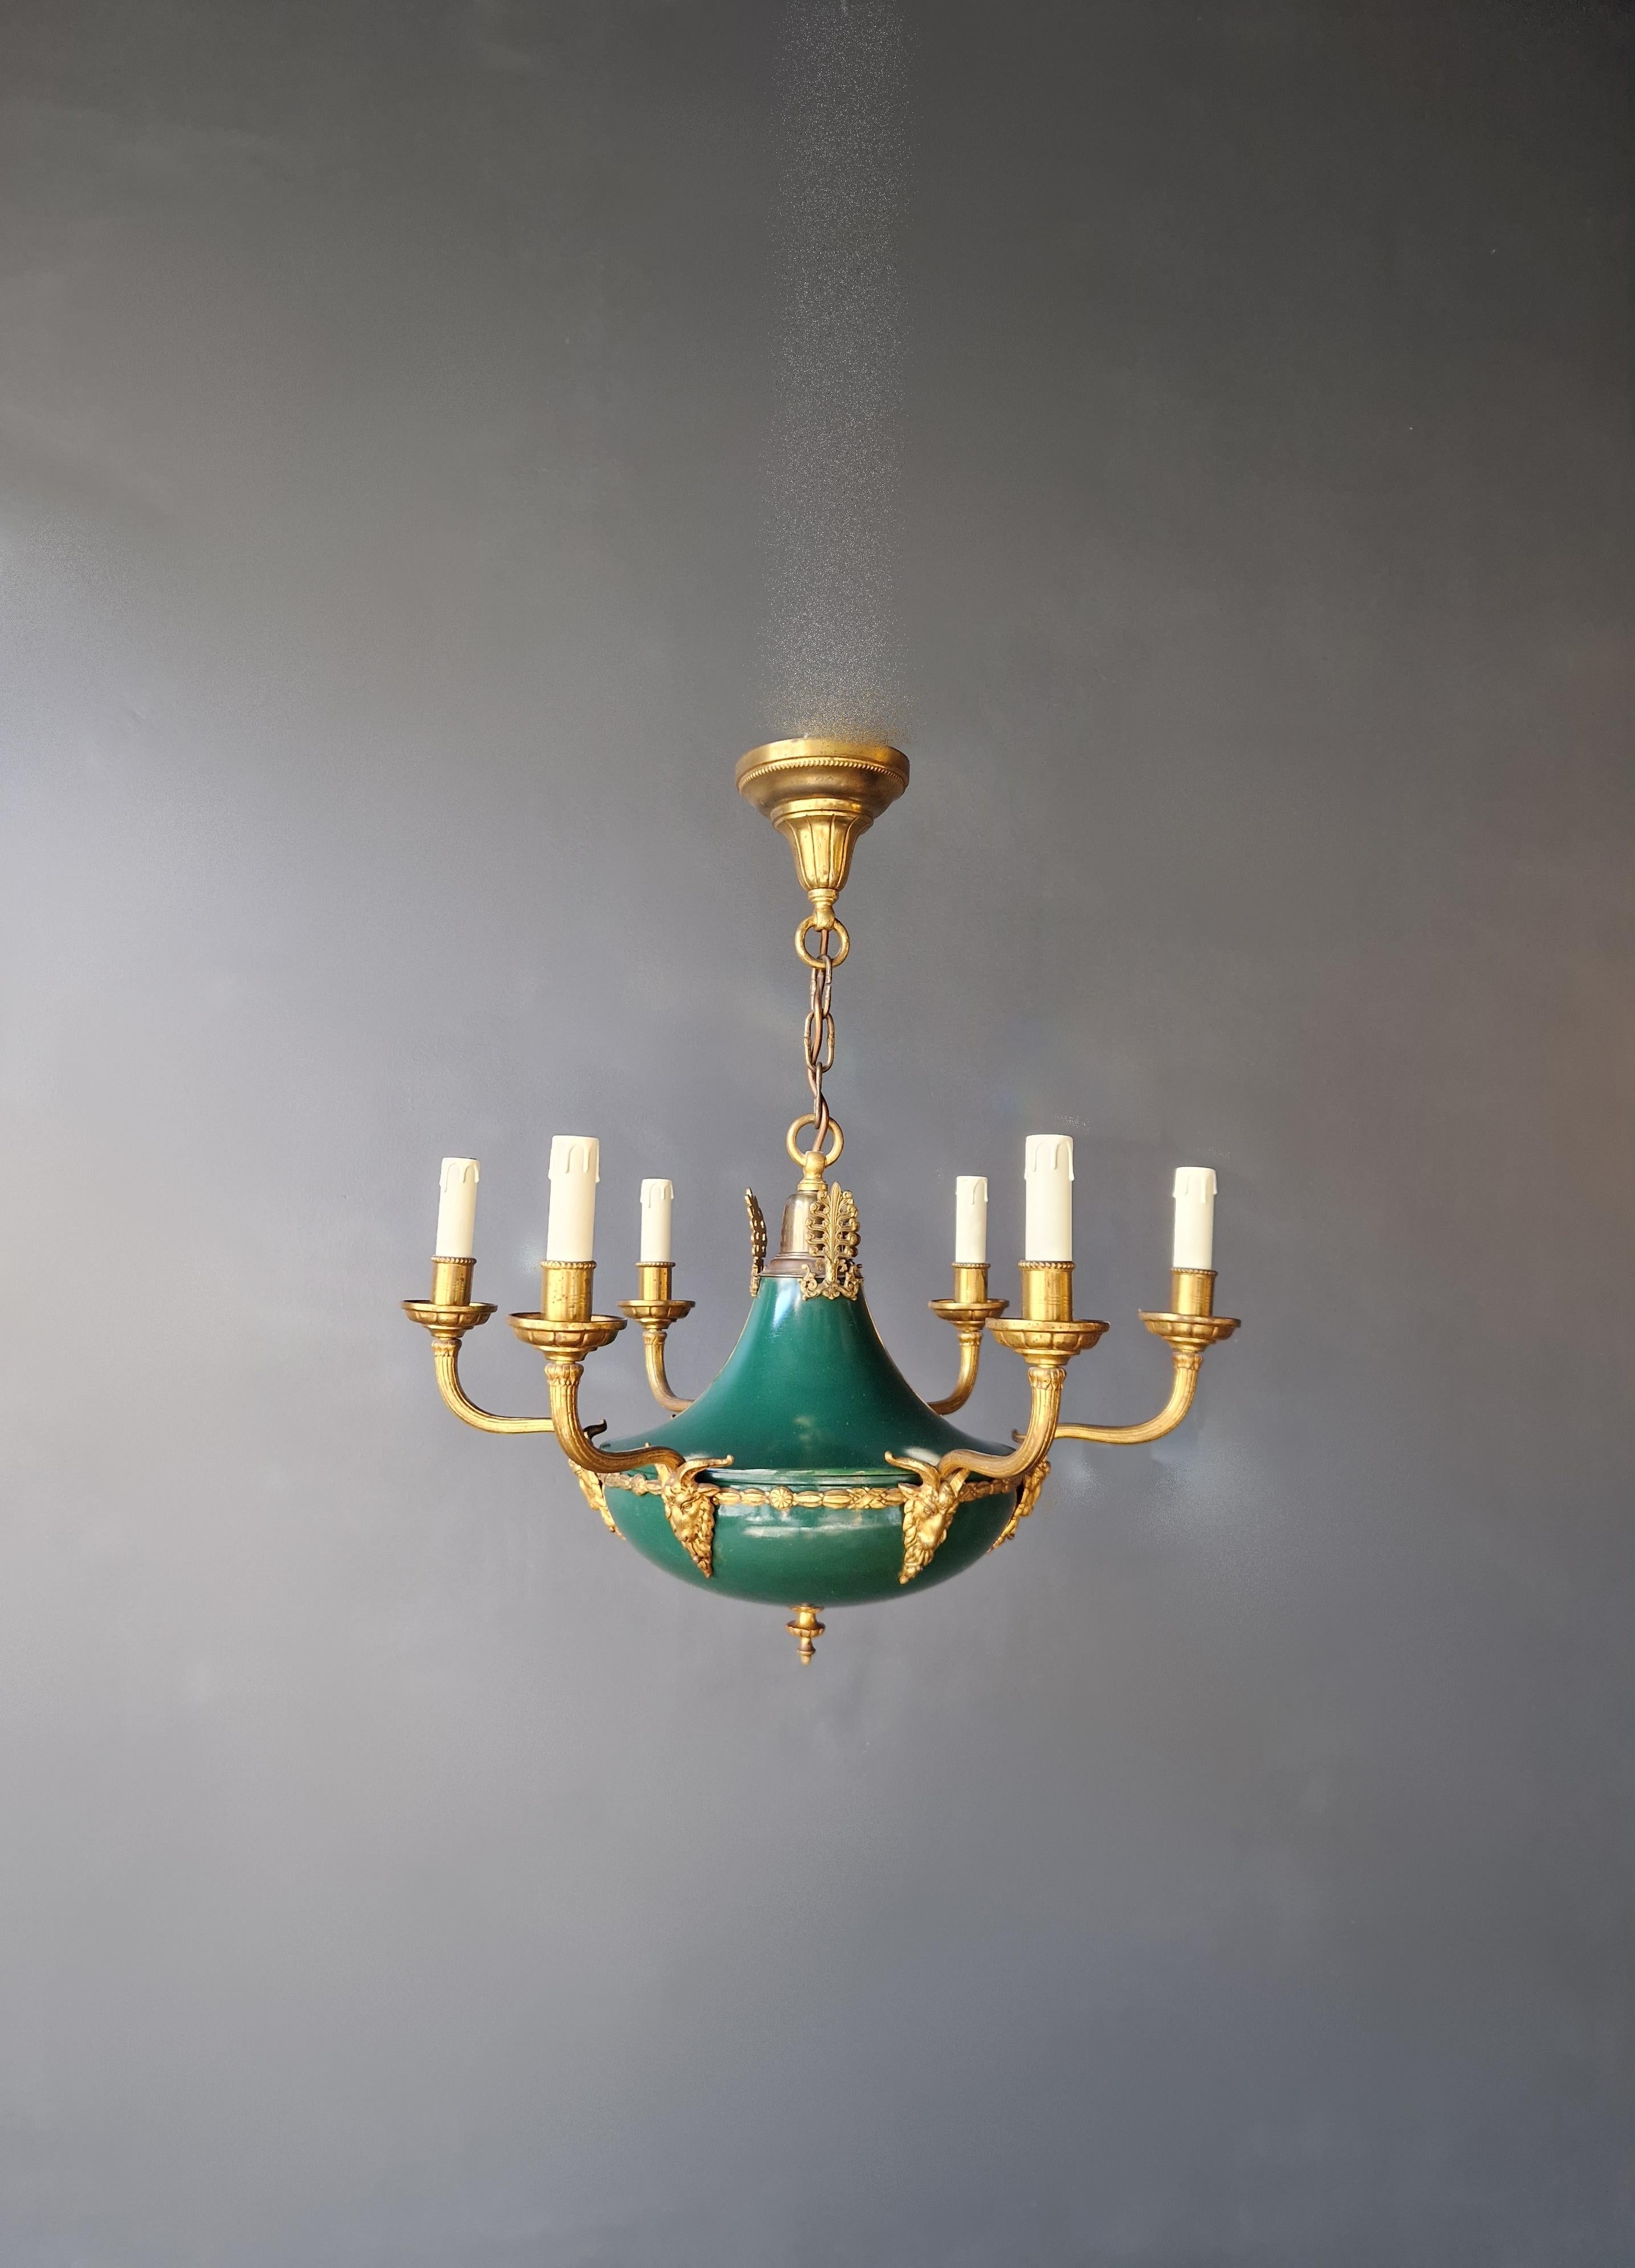 Gilt Antique Empire Lustre Neoclassical Patina Green Brass Chandelier In Good Condition For Sale In Berlin, DE